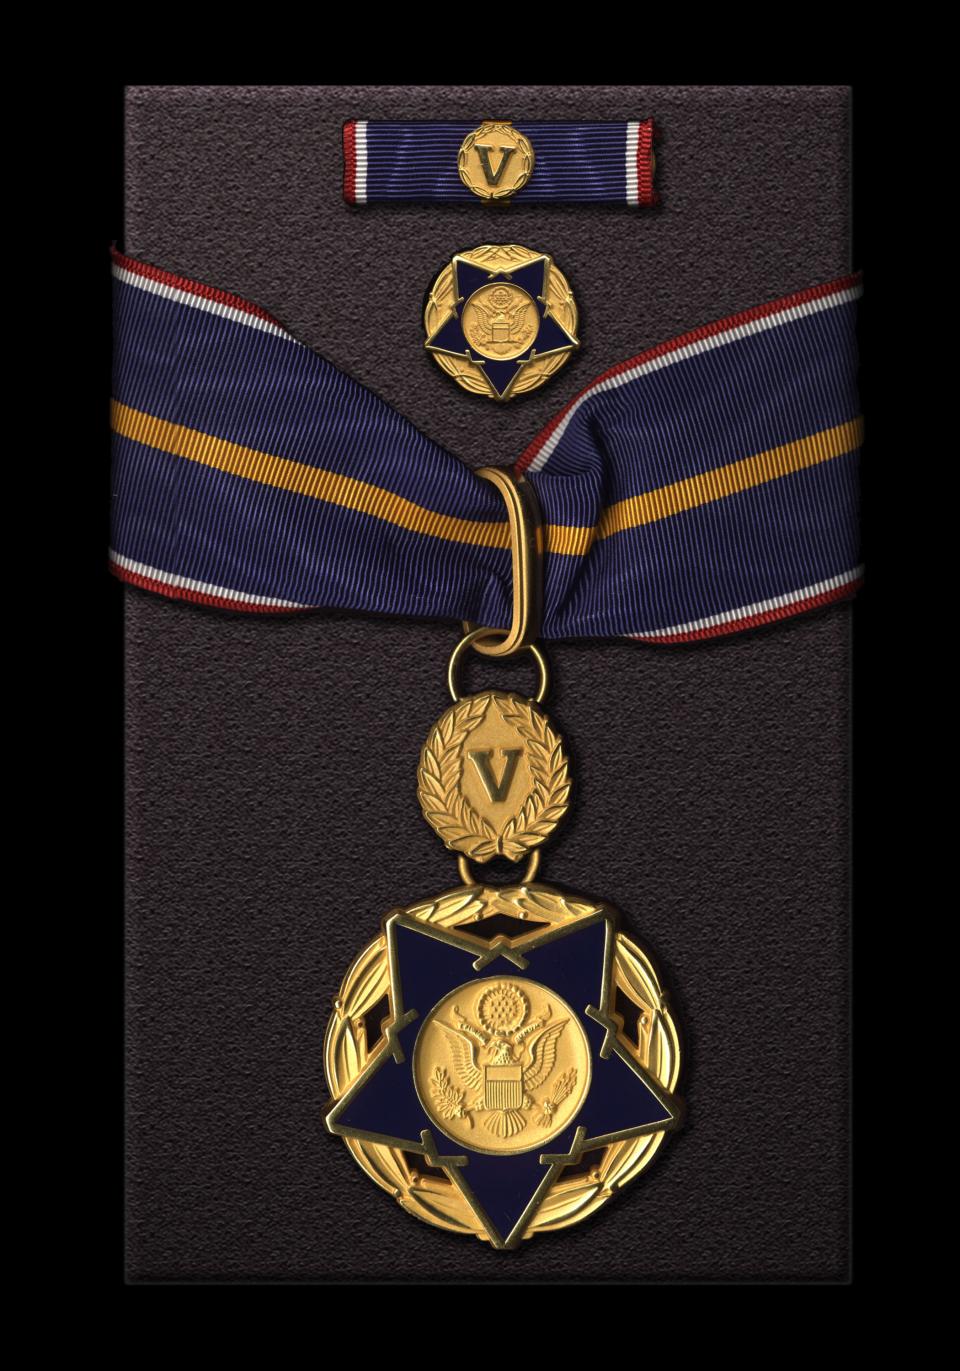 closeup image of a Medal of Valor award against a dark background